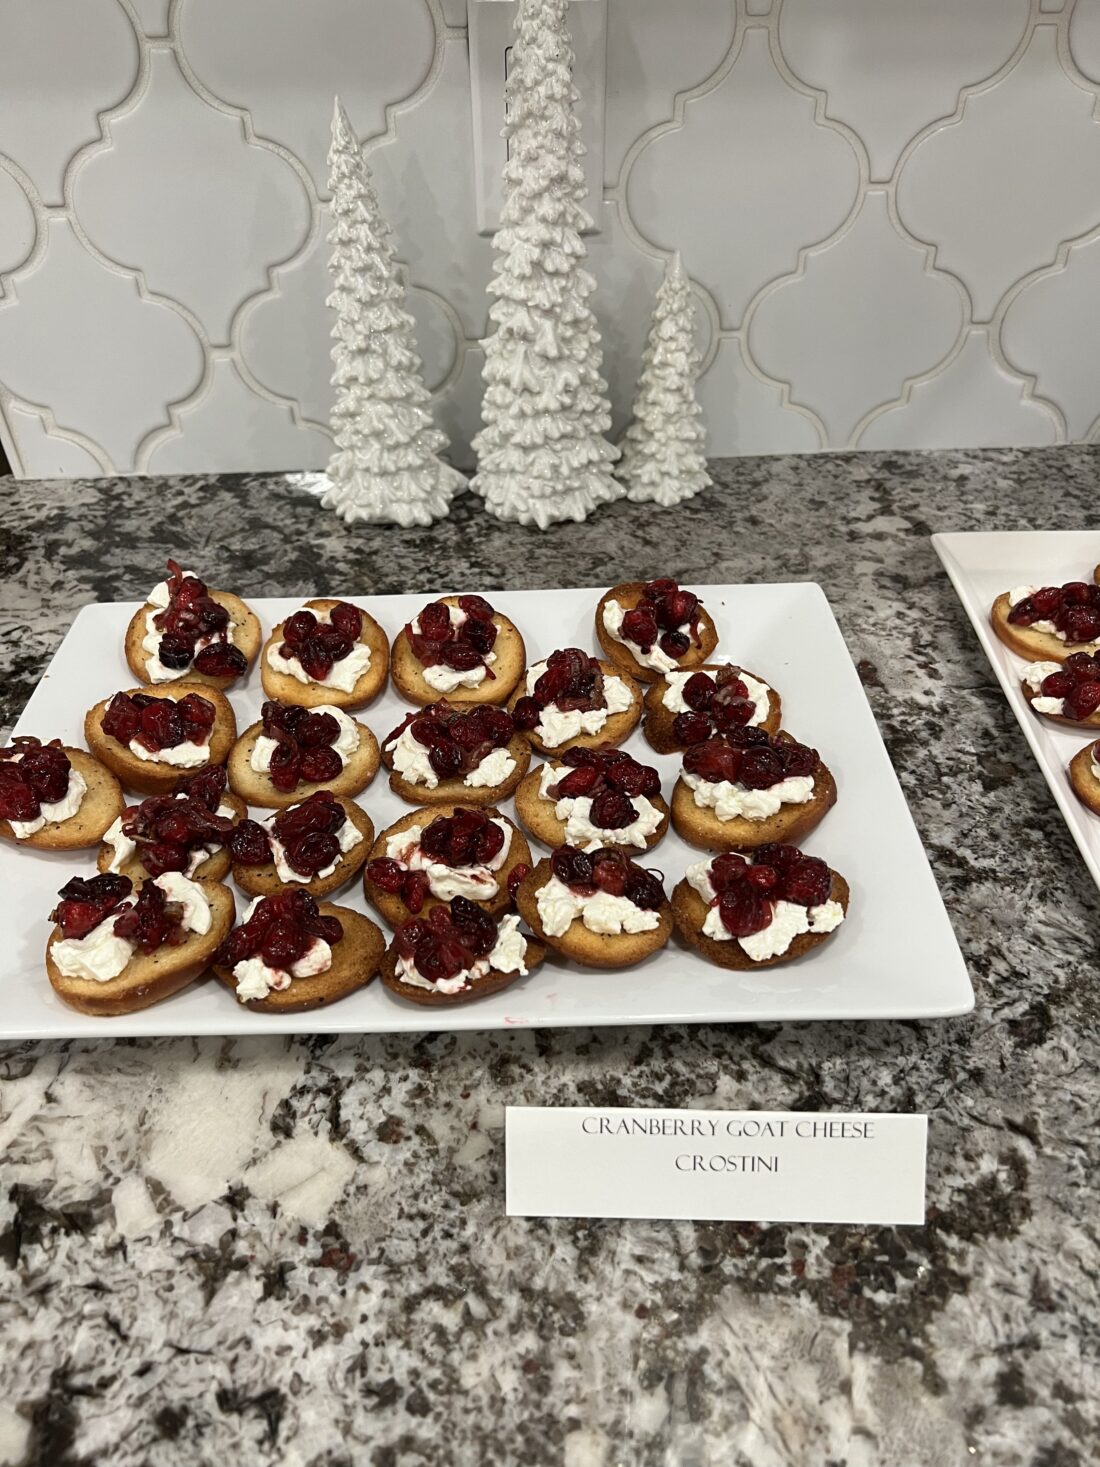 Cranberry Goat Cheese Crostini. Party food ideas.